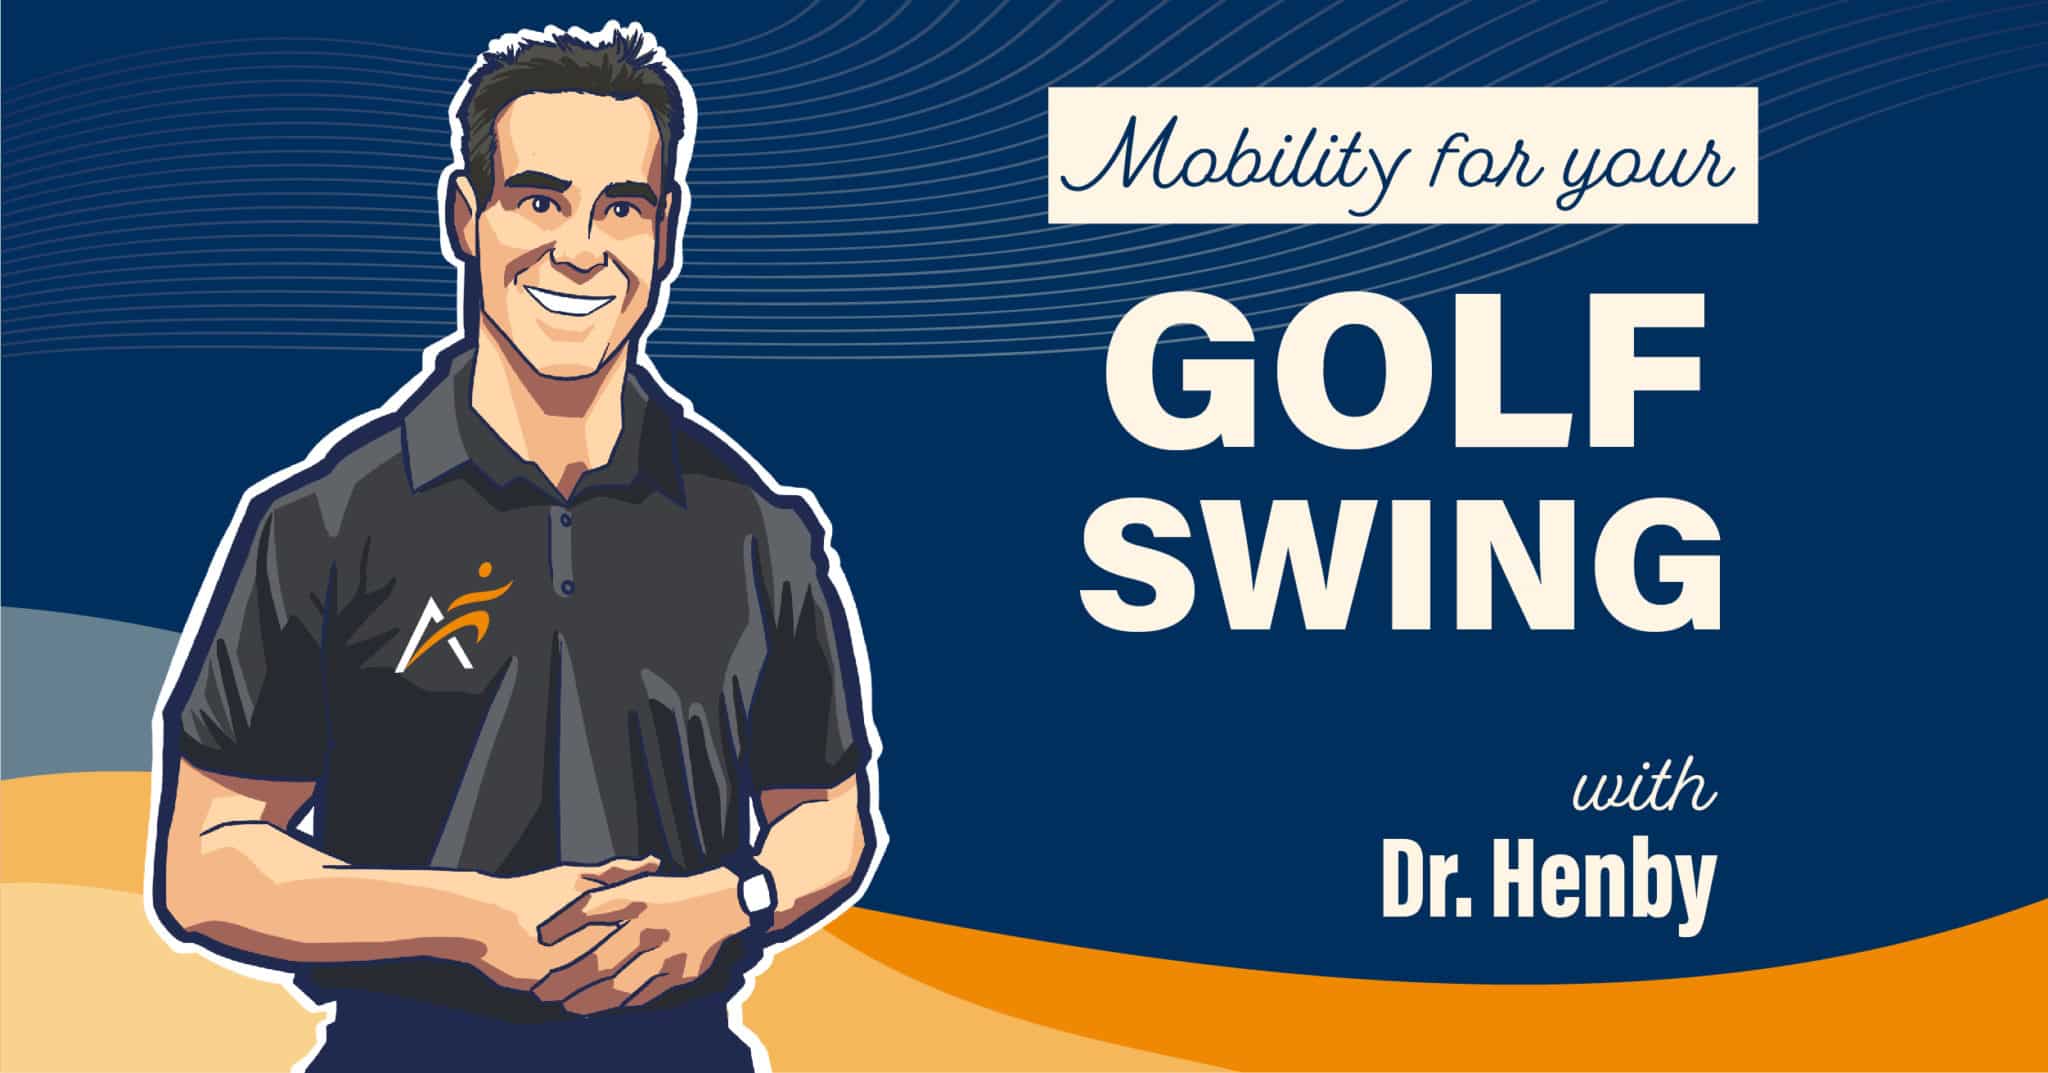 Mobility for your golf swing